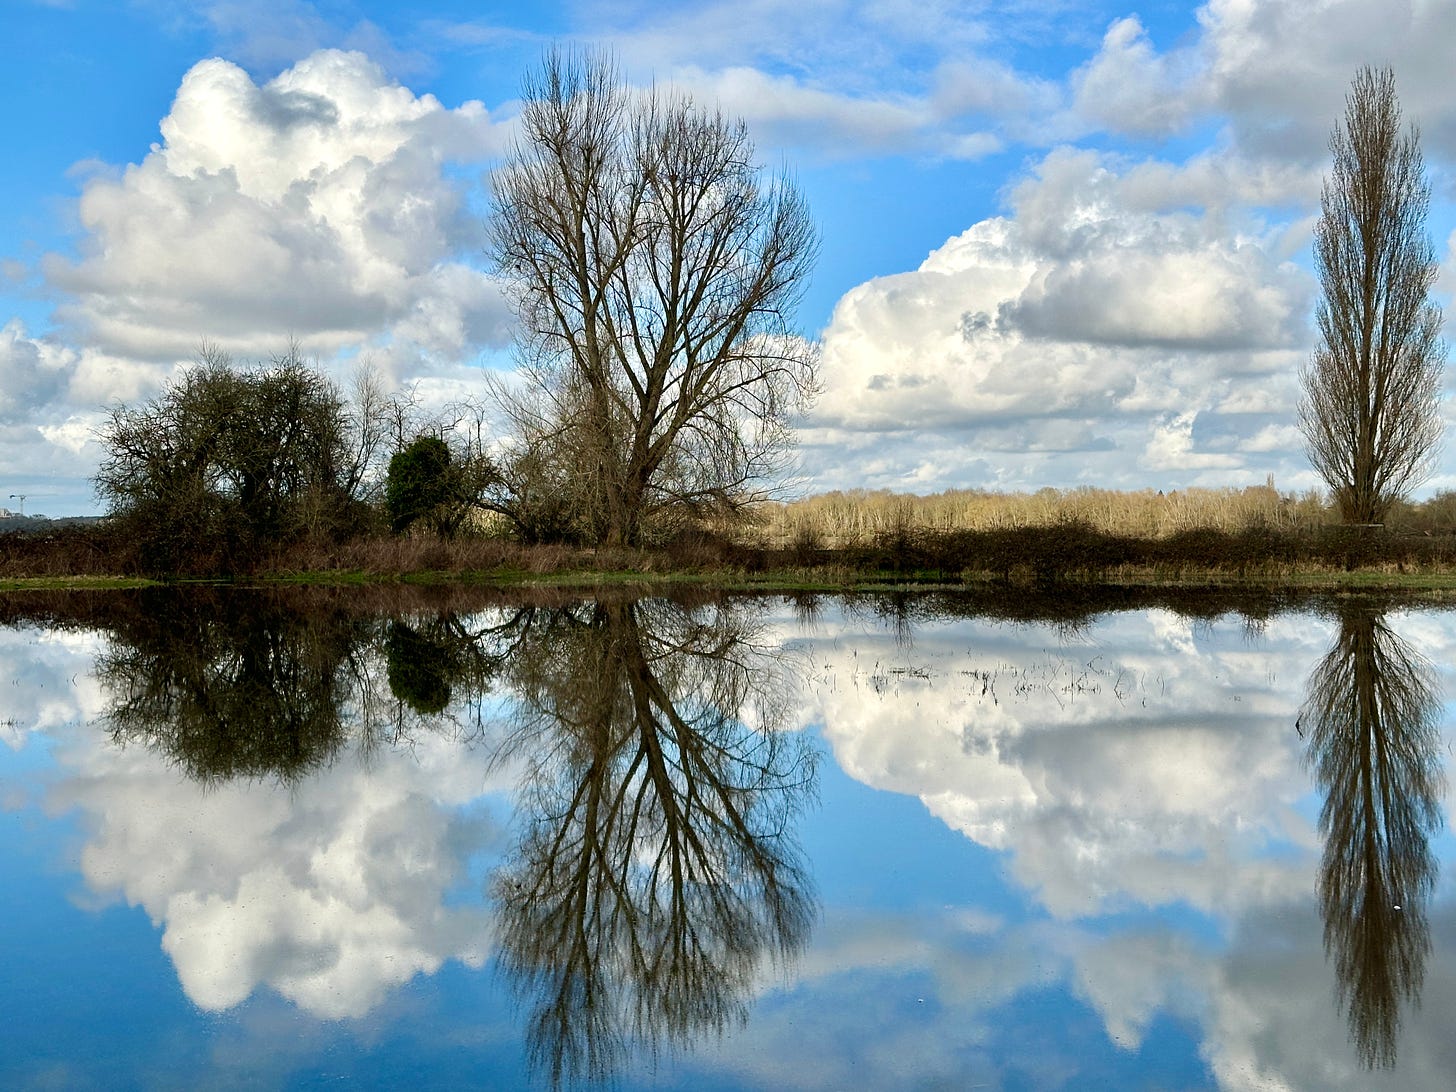 A blue winter sky with billowing clouds is reflected in a the mirror-like water of a flooded field.